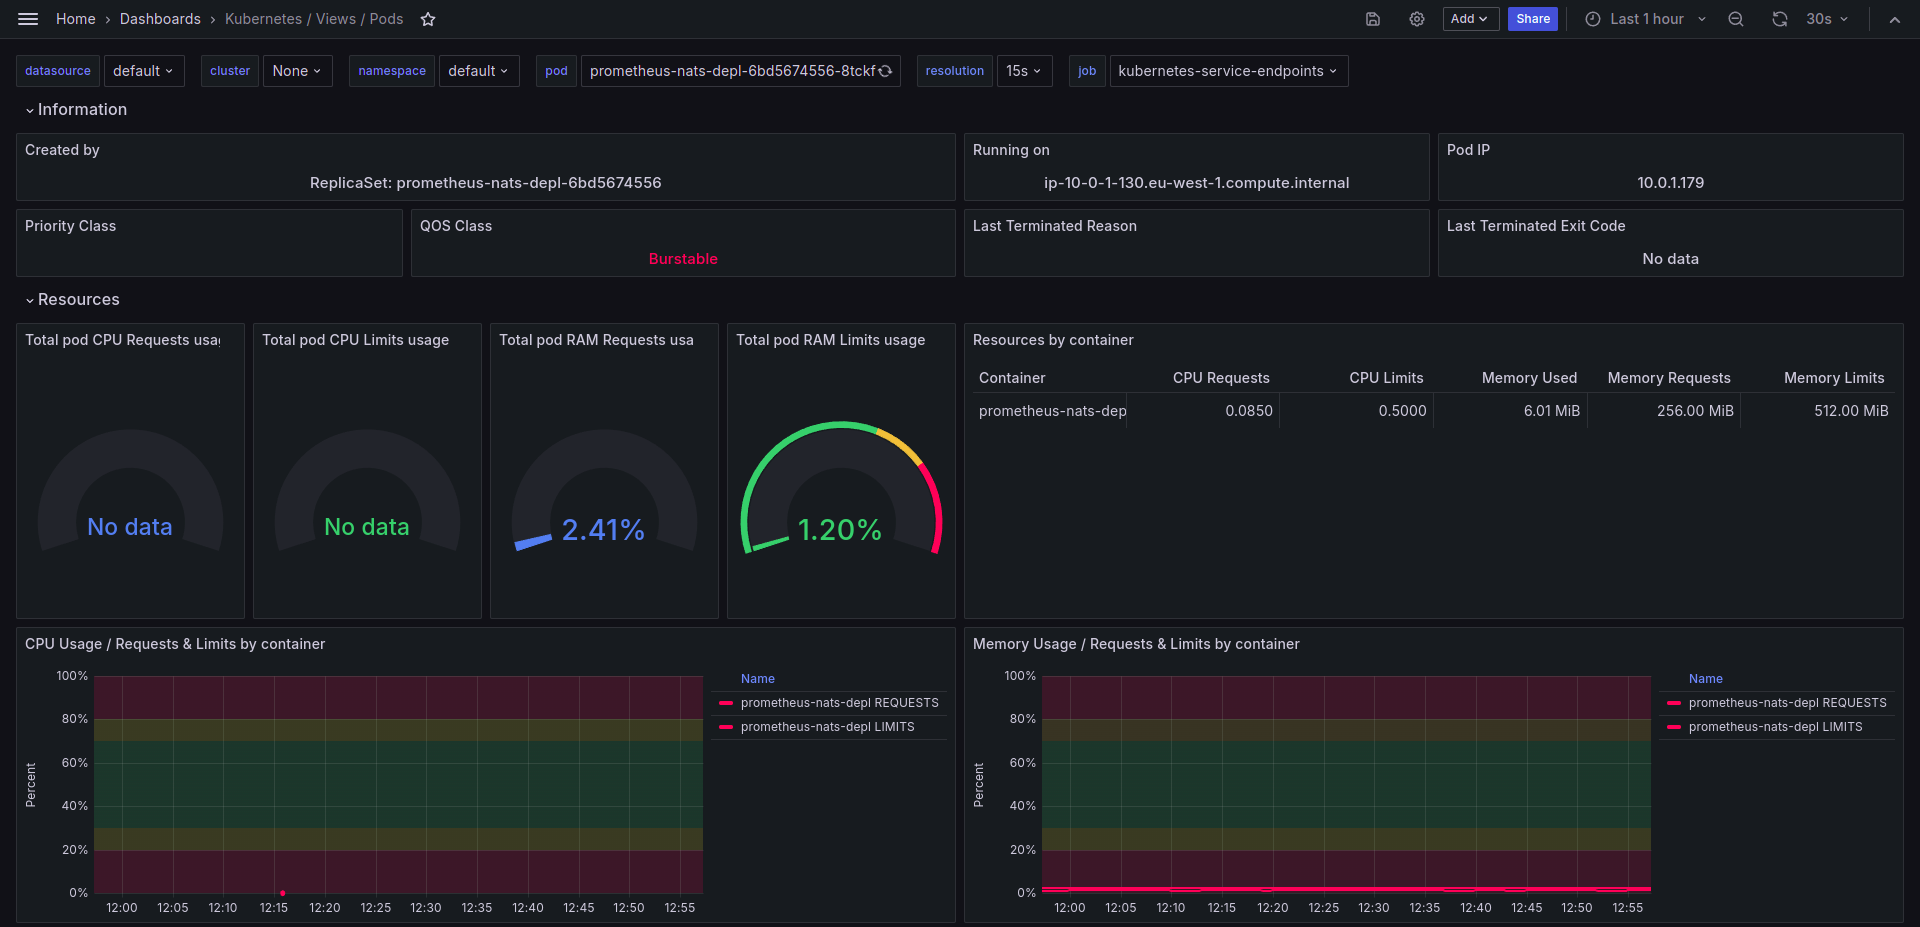 Learn to monitor Kubernetes effectively with Prometheus and Grafana. Our guide covers setup and visualization for reliable performance insights.